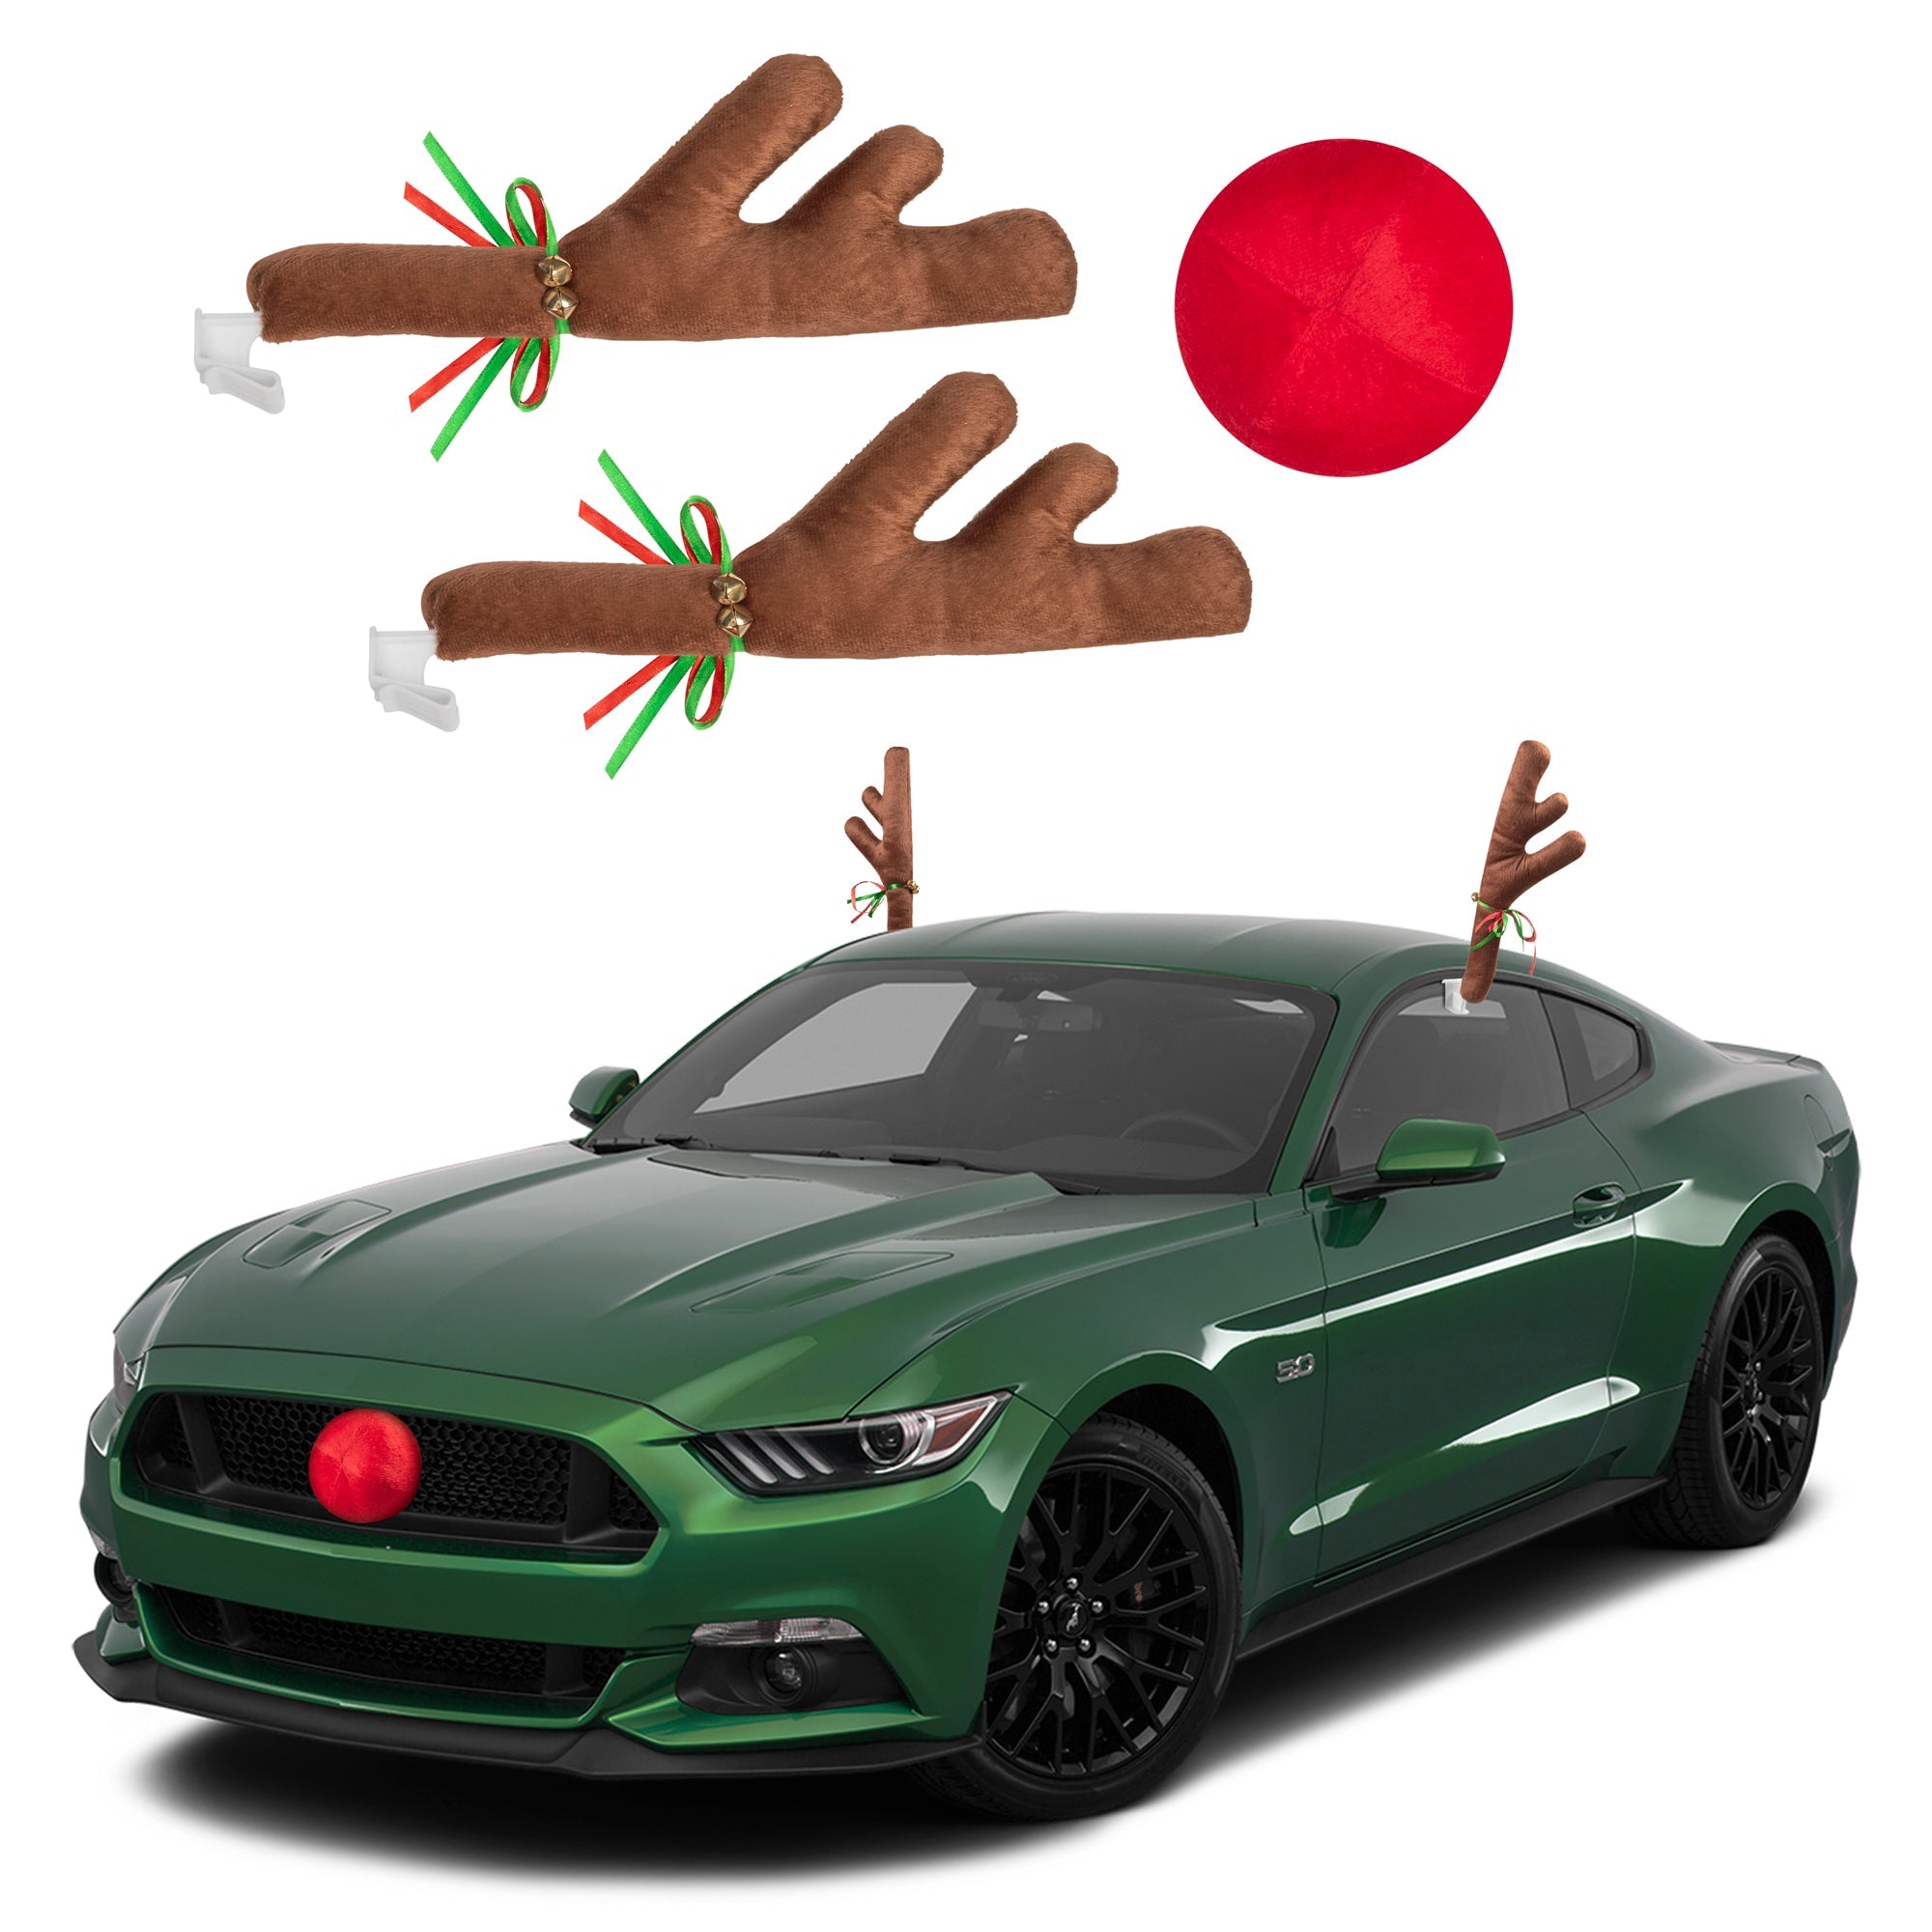 Carbella Car Christmas Reindeer Antlers and Nose - Xmas Decorations for Car - Window Holiday Kit for Car Truck Van SUV